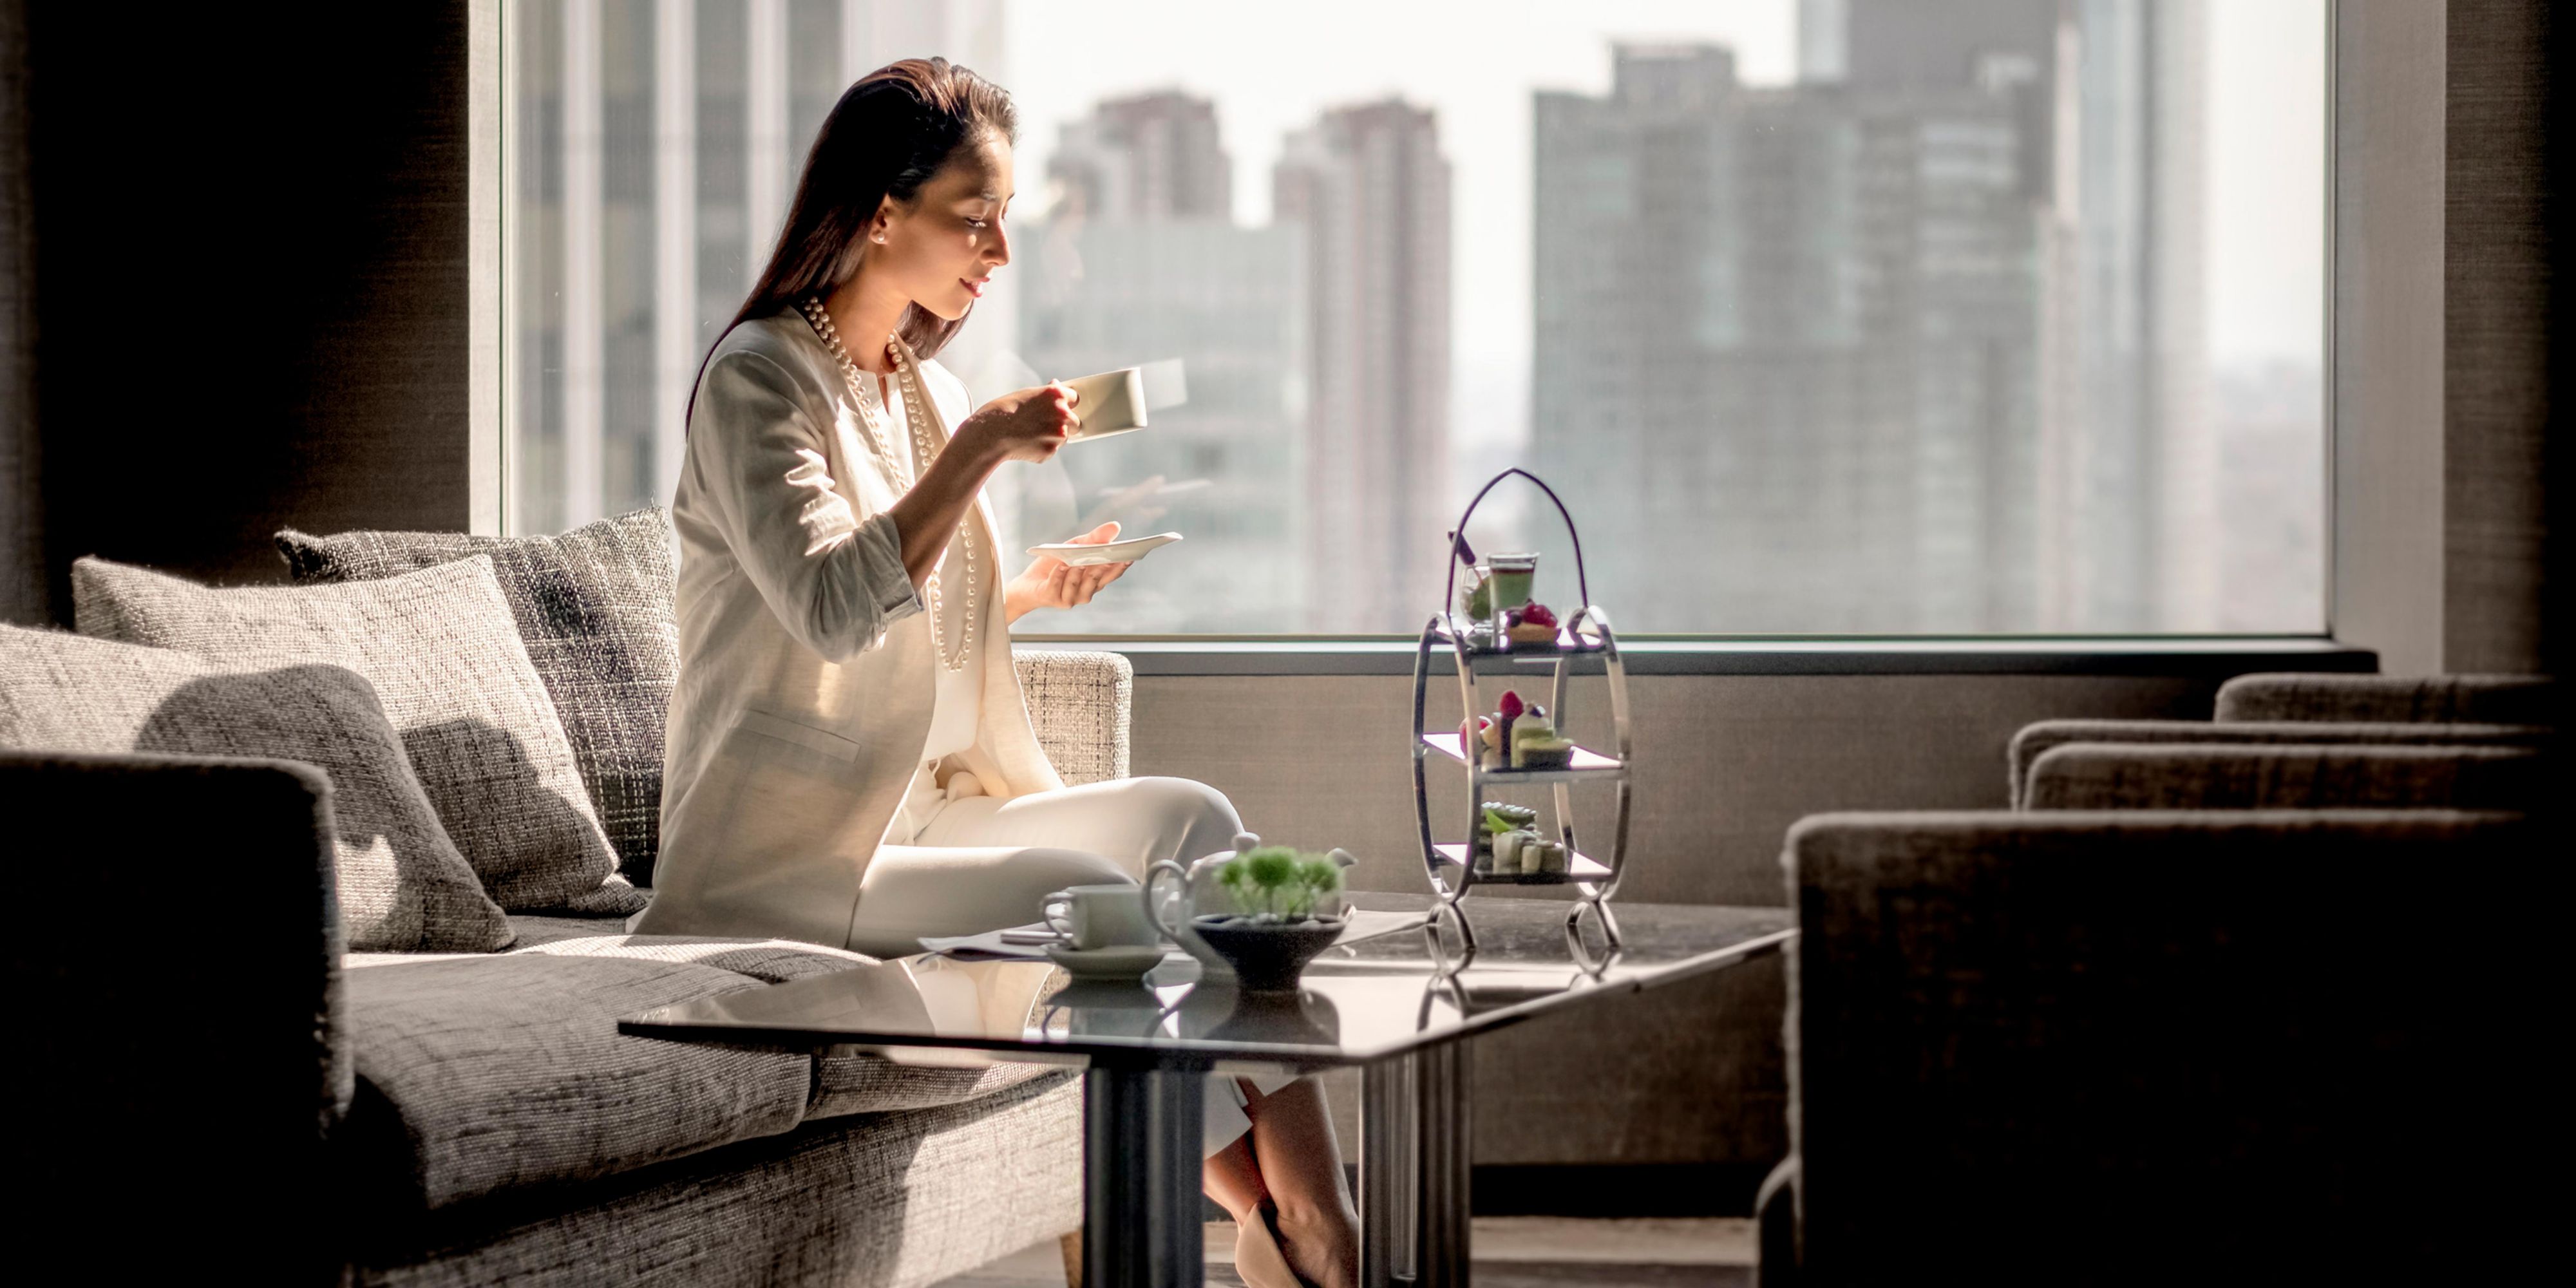 Open the door to Club InterContinental and step into the next level of luxury. From the 35th floor, you’ll enjoy stunning Tokyo views and the most spacious and sophisticated lounge in the city. Work, relax, or indulge in our exclusive private selections during your stay.